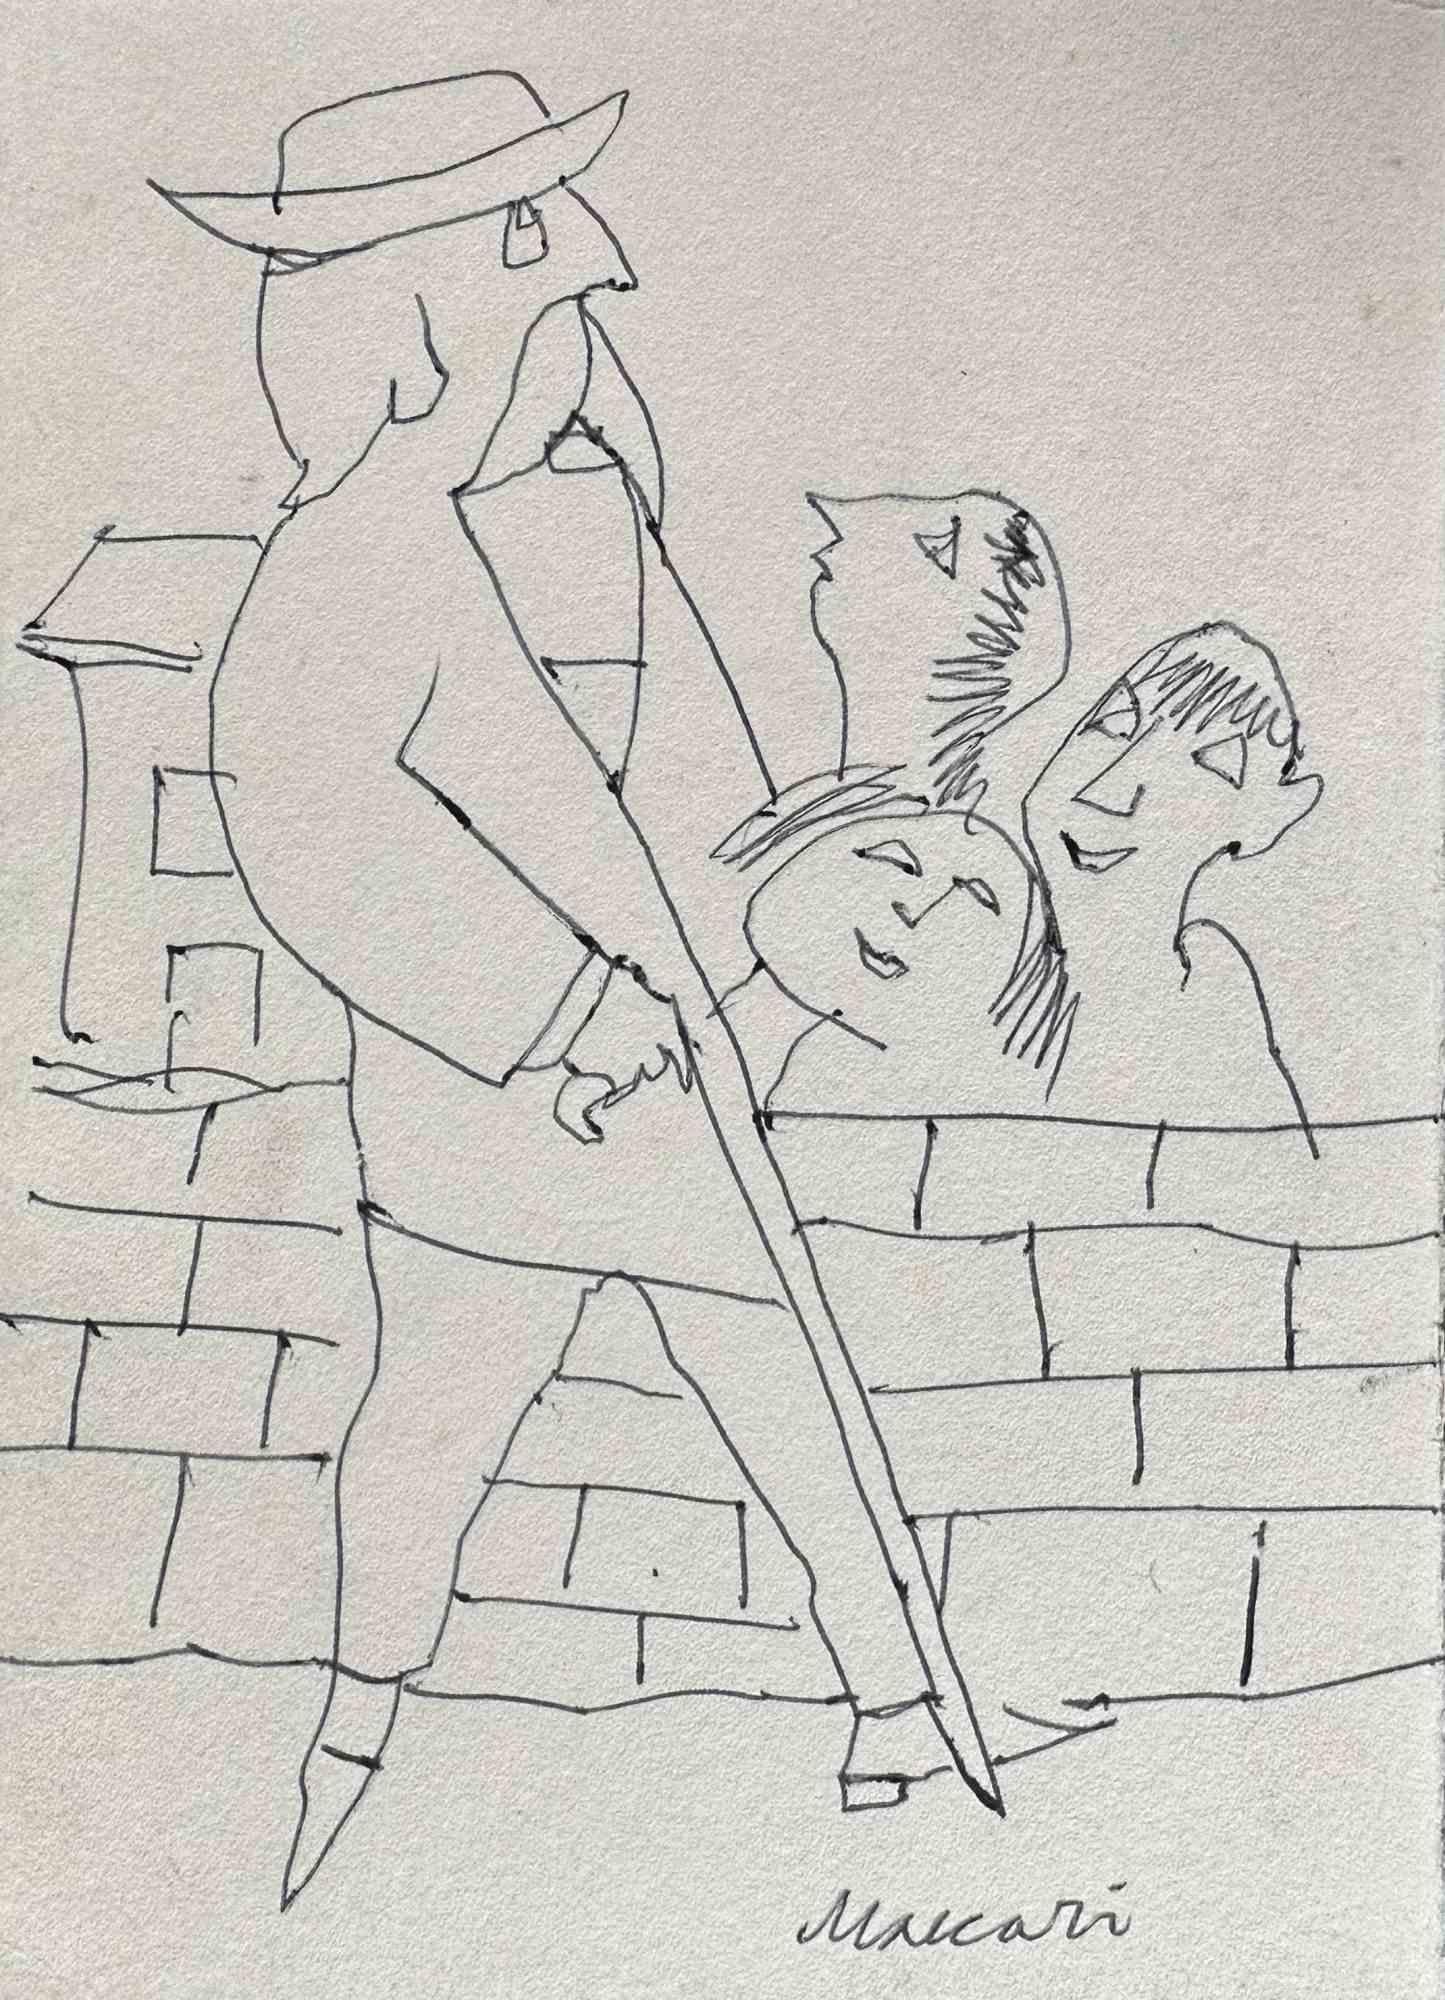 Walking Man is a pen Drawing realized by Mino Maccari  (1924-1989) in the 1960s.

Hand-signed on the lower.

Good conditions.

Mino Maccari (Siena, 1924-Rome, June 16, 1989) was an Italian writer, painter, engraver and journalist, winner of the